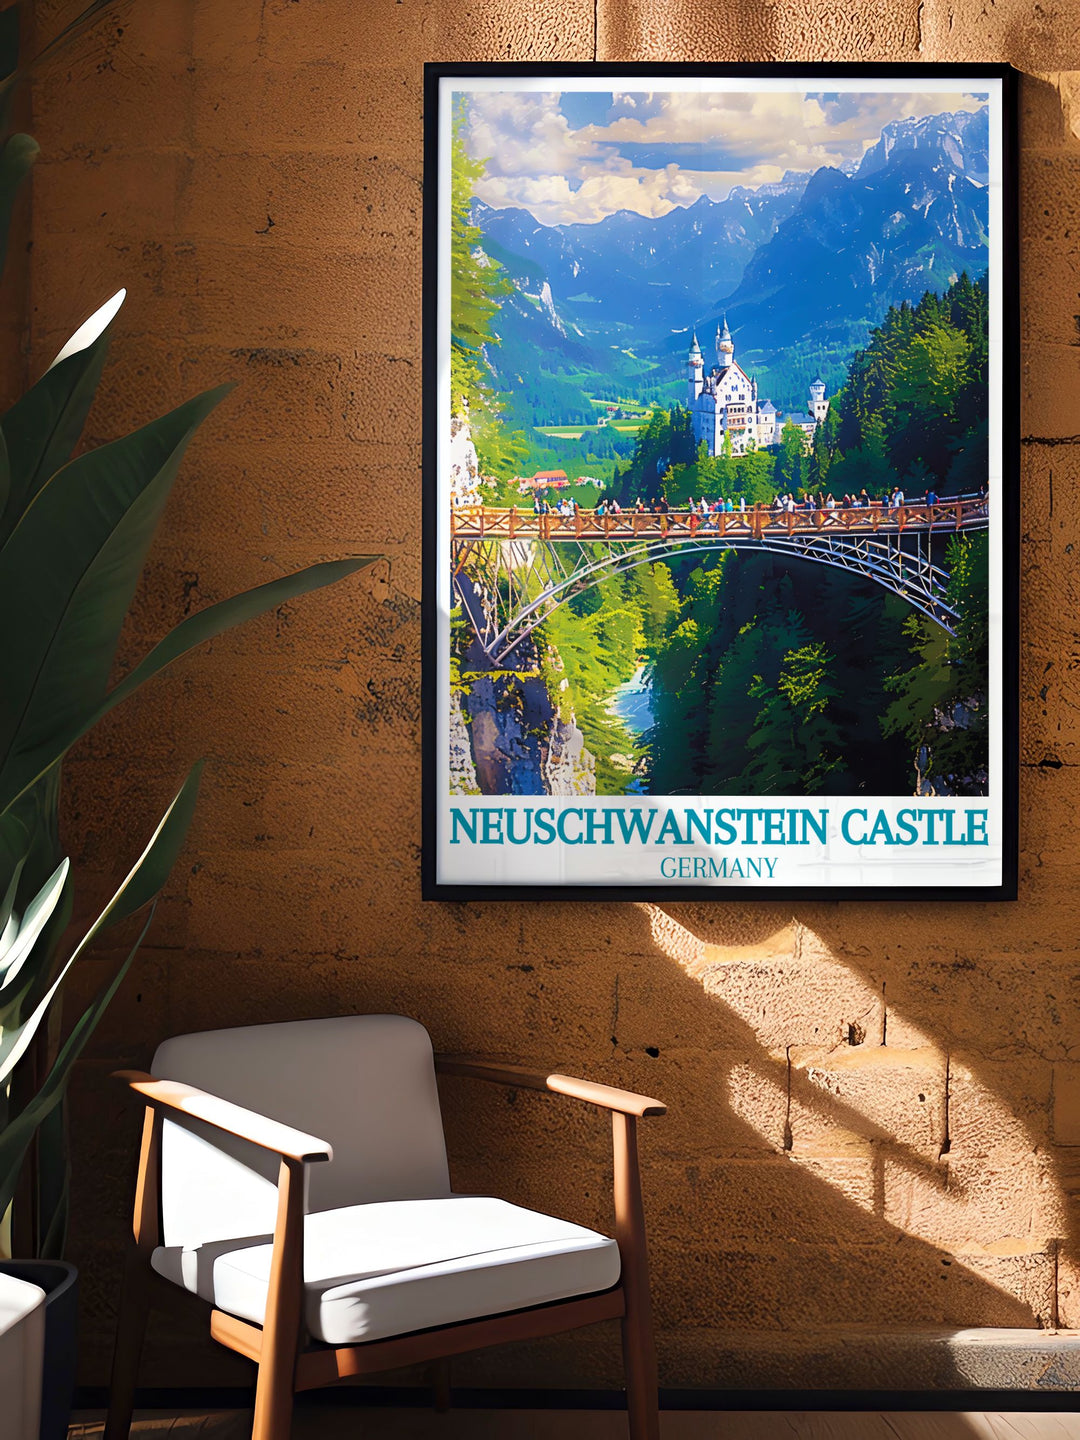 Featuring Neuschwanstein Castles iconic architecture and the stunning views from Marienbrücke, this poster captures the essence of Bavarias heritage and scenic charm, perfect for any wall art collection.